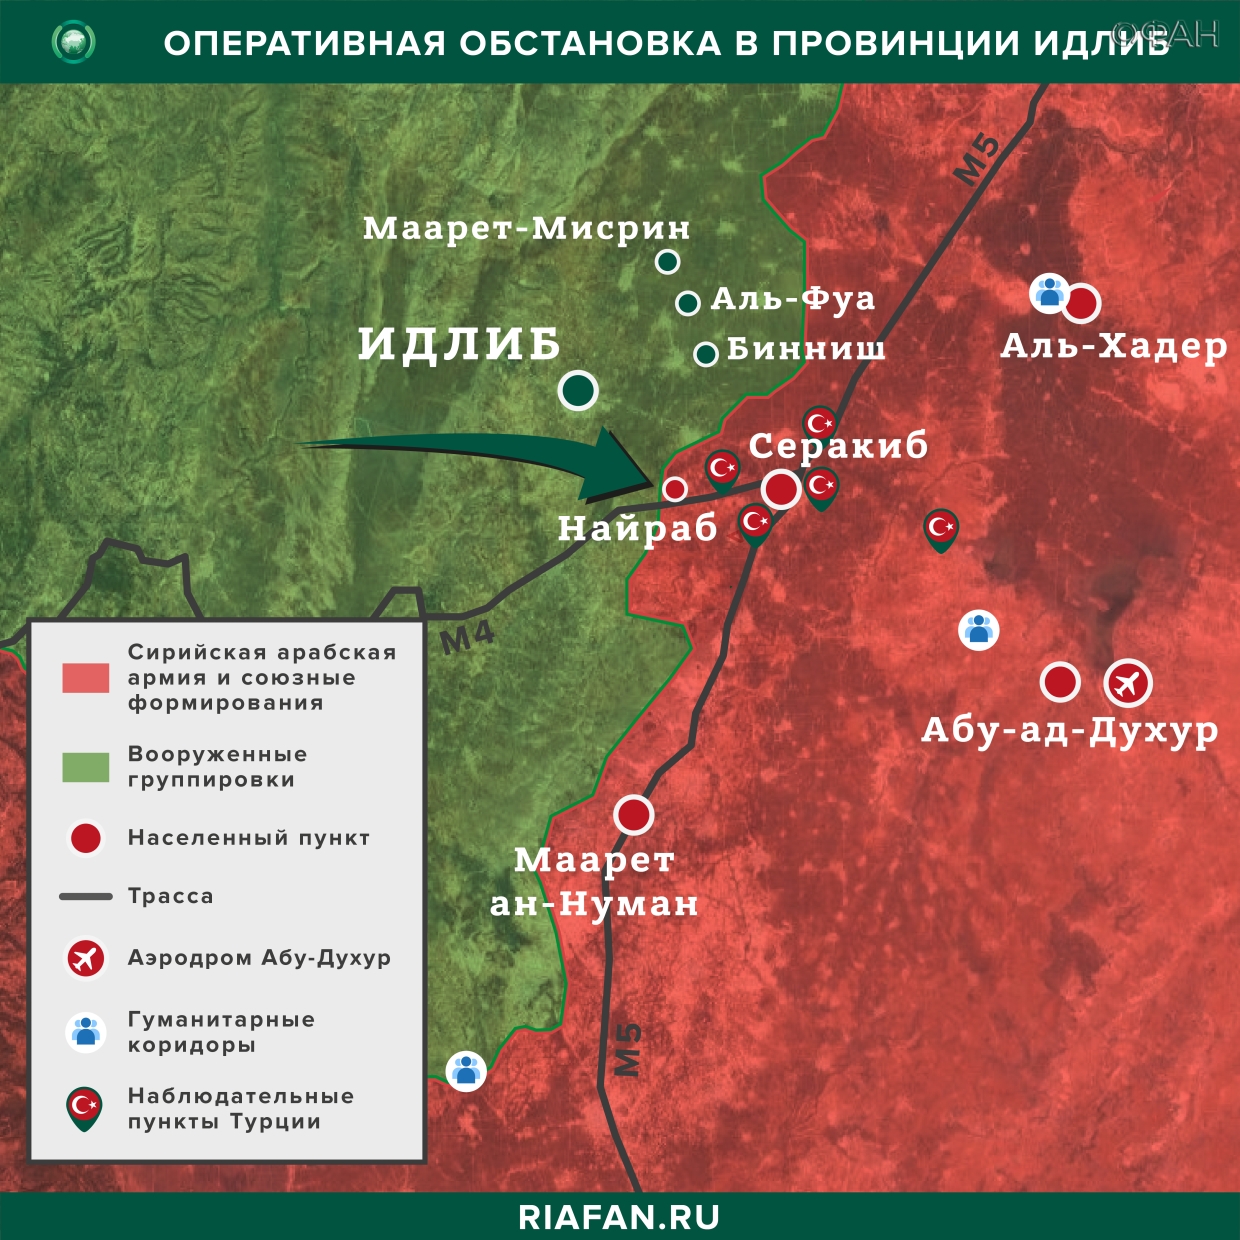 Syria the results of the day on 21 February 06.00: FSI Russian breakthrough prevented militants in Idlib, US patrol prevented the passage of the Russian Federation in Hasaka